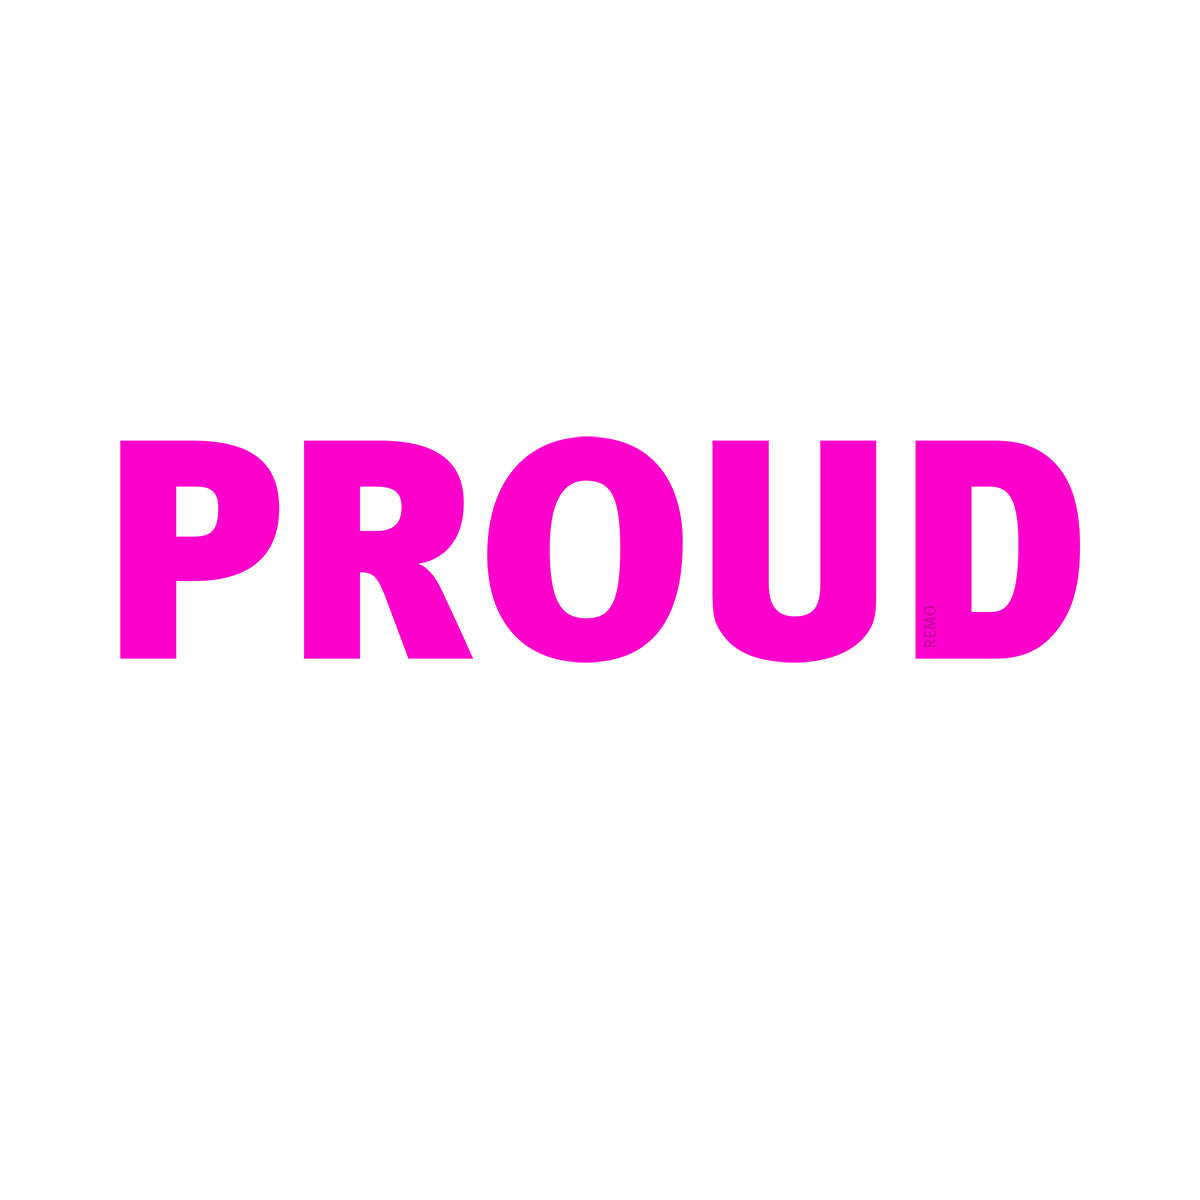 Proud Canvas Totes